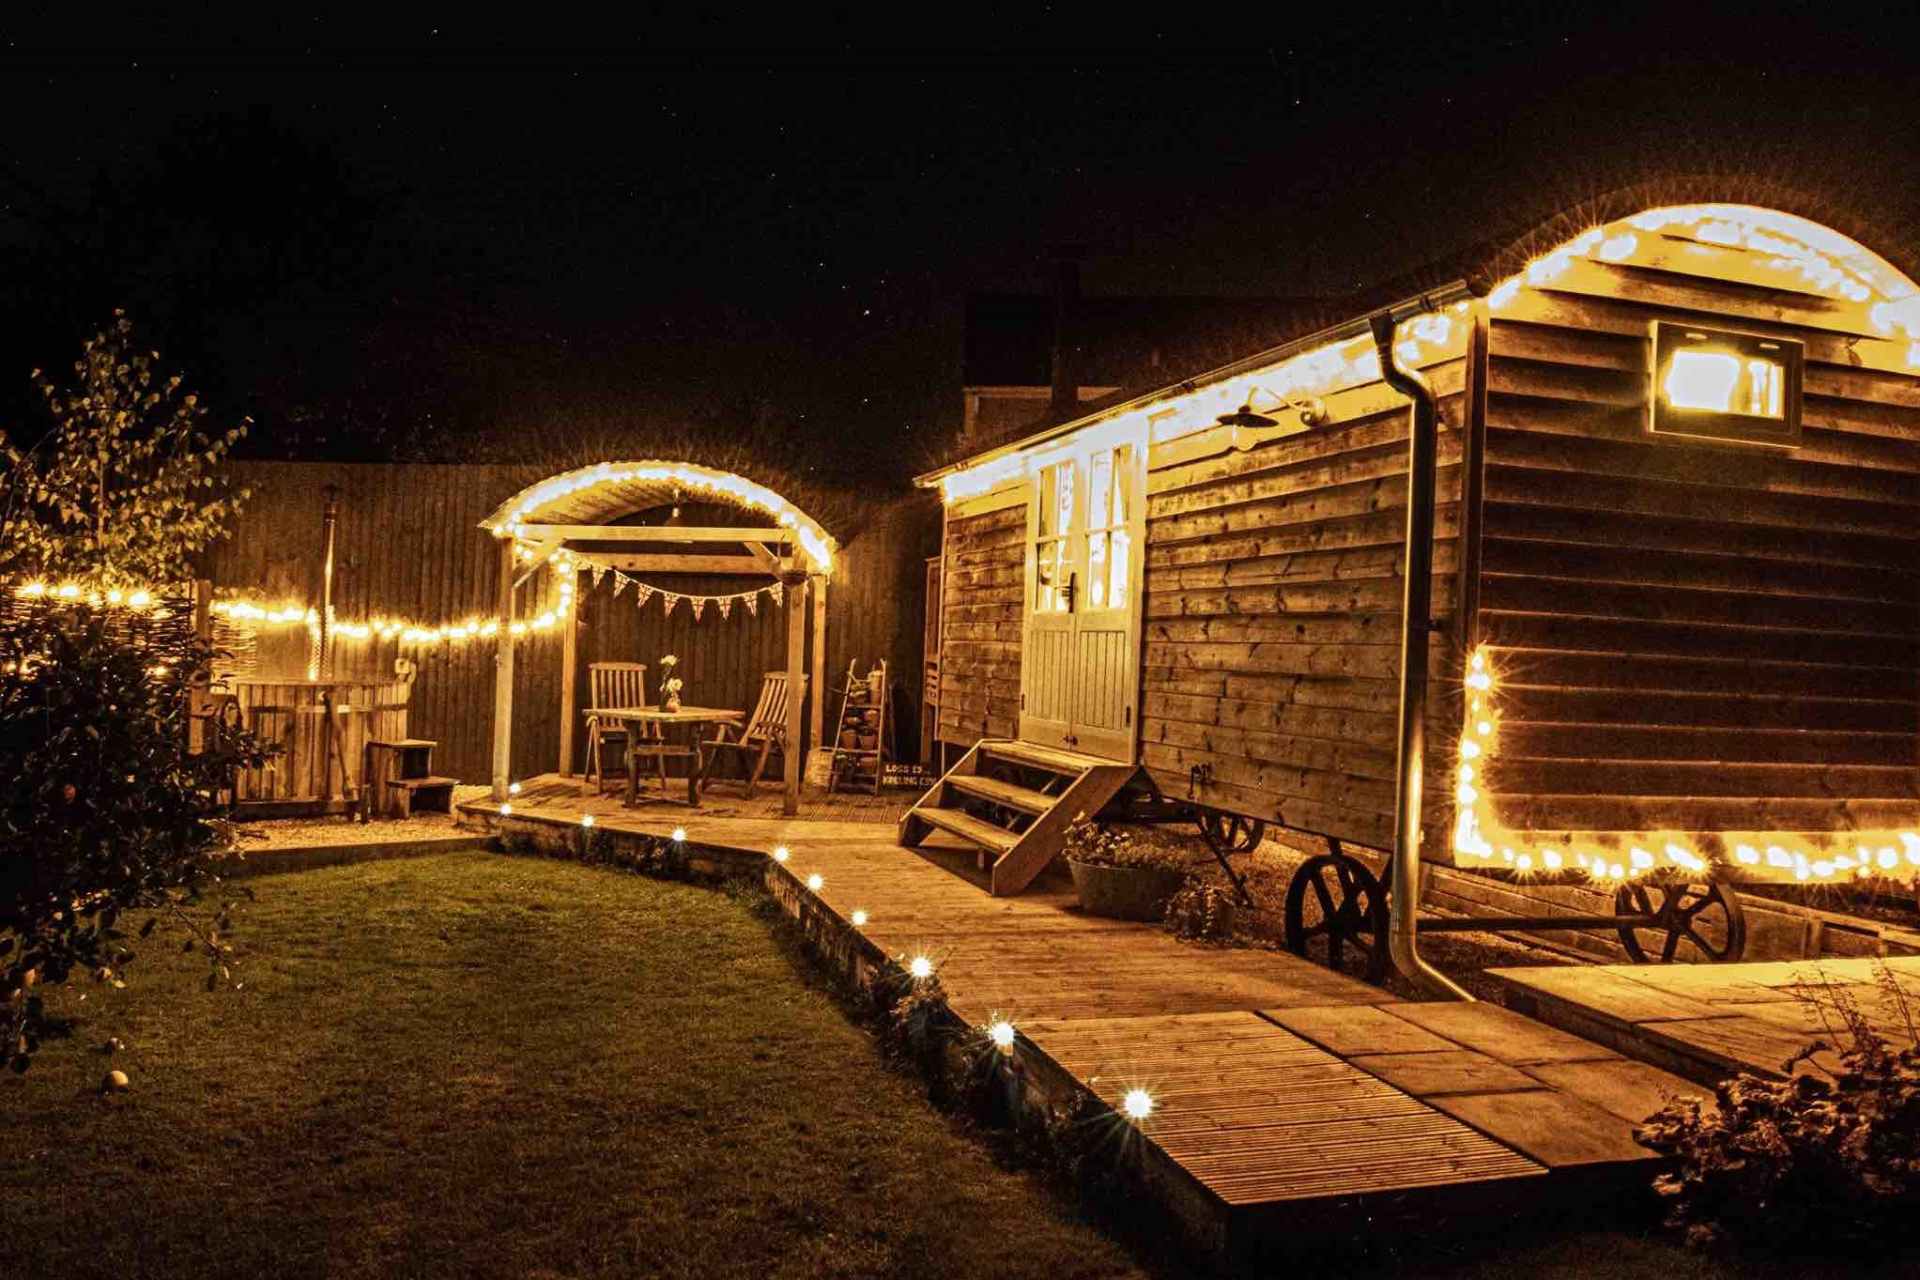 esmes-escape-shepherds-hut-on-decking-lit-up-at-night